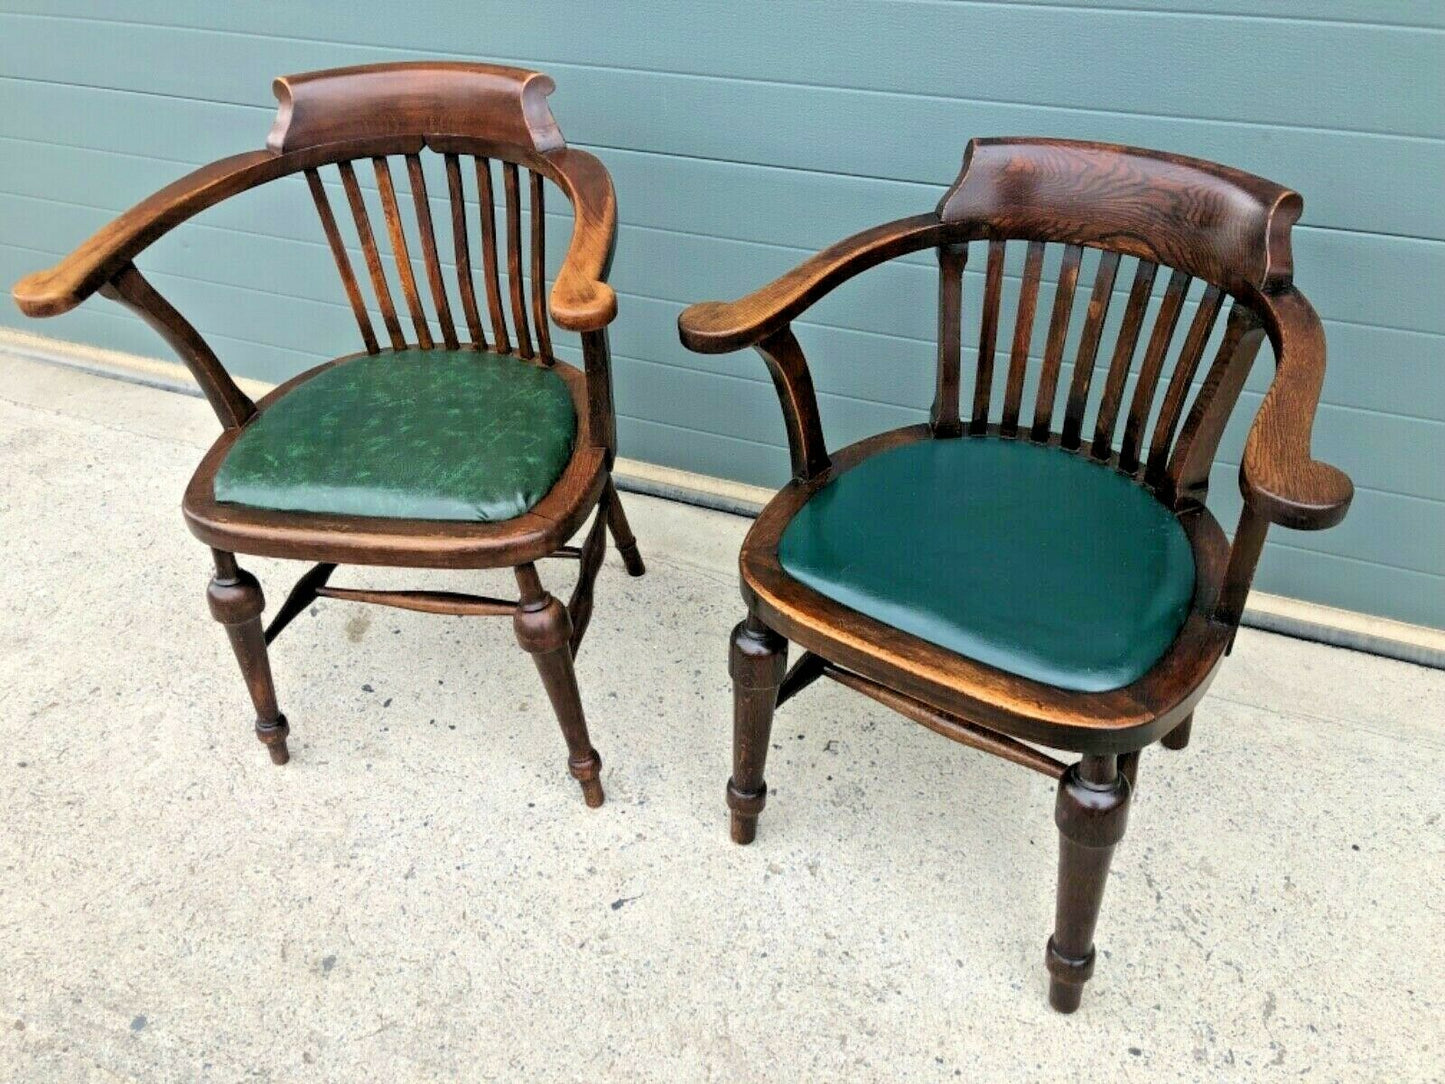 089.....Two Similar Handsome Vintage Desk Chairs